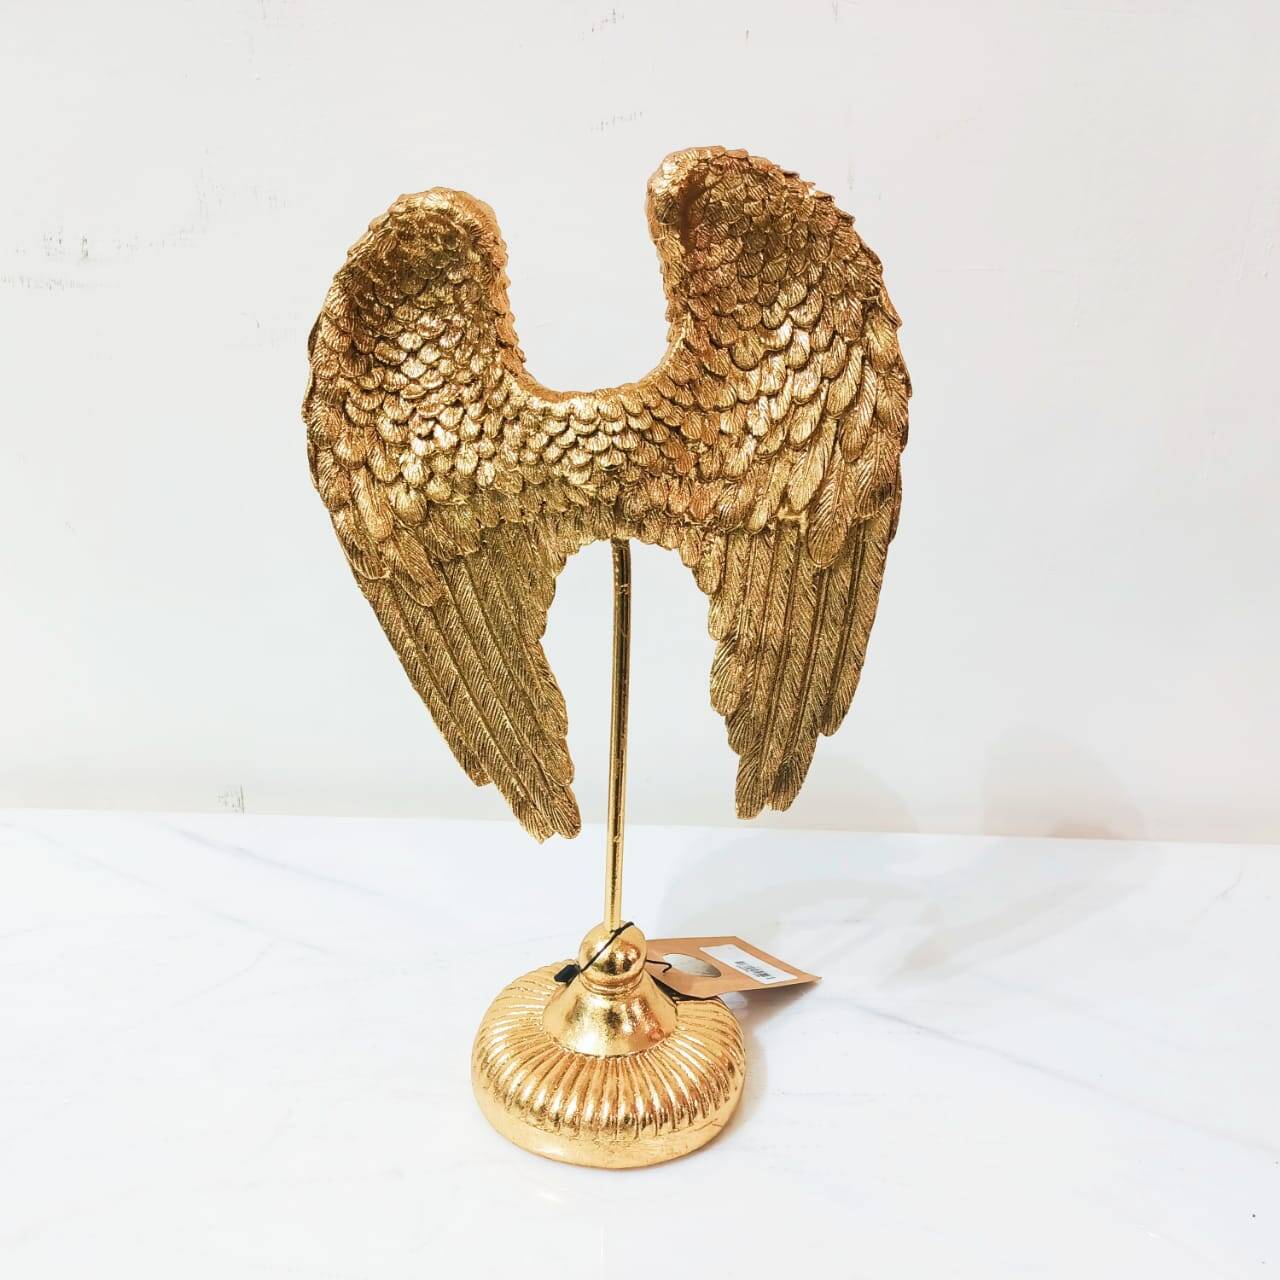 Resin Eagle Wings Golden Statue